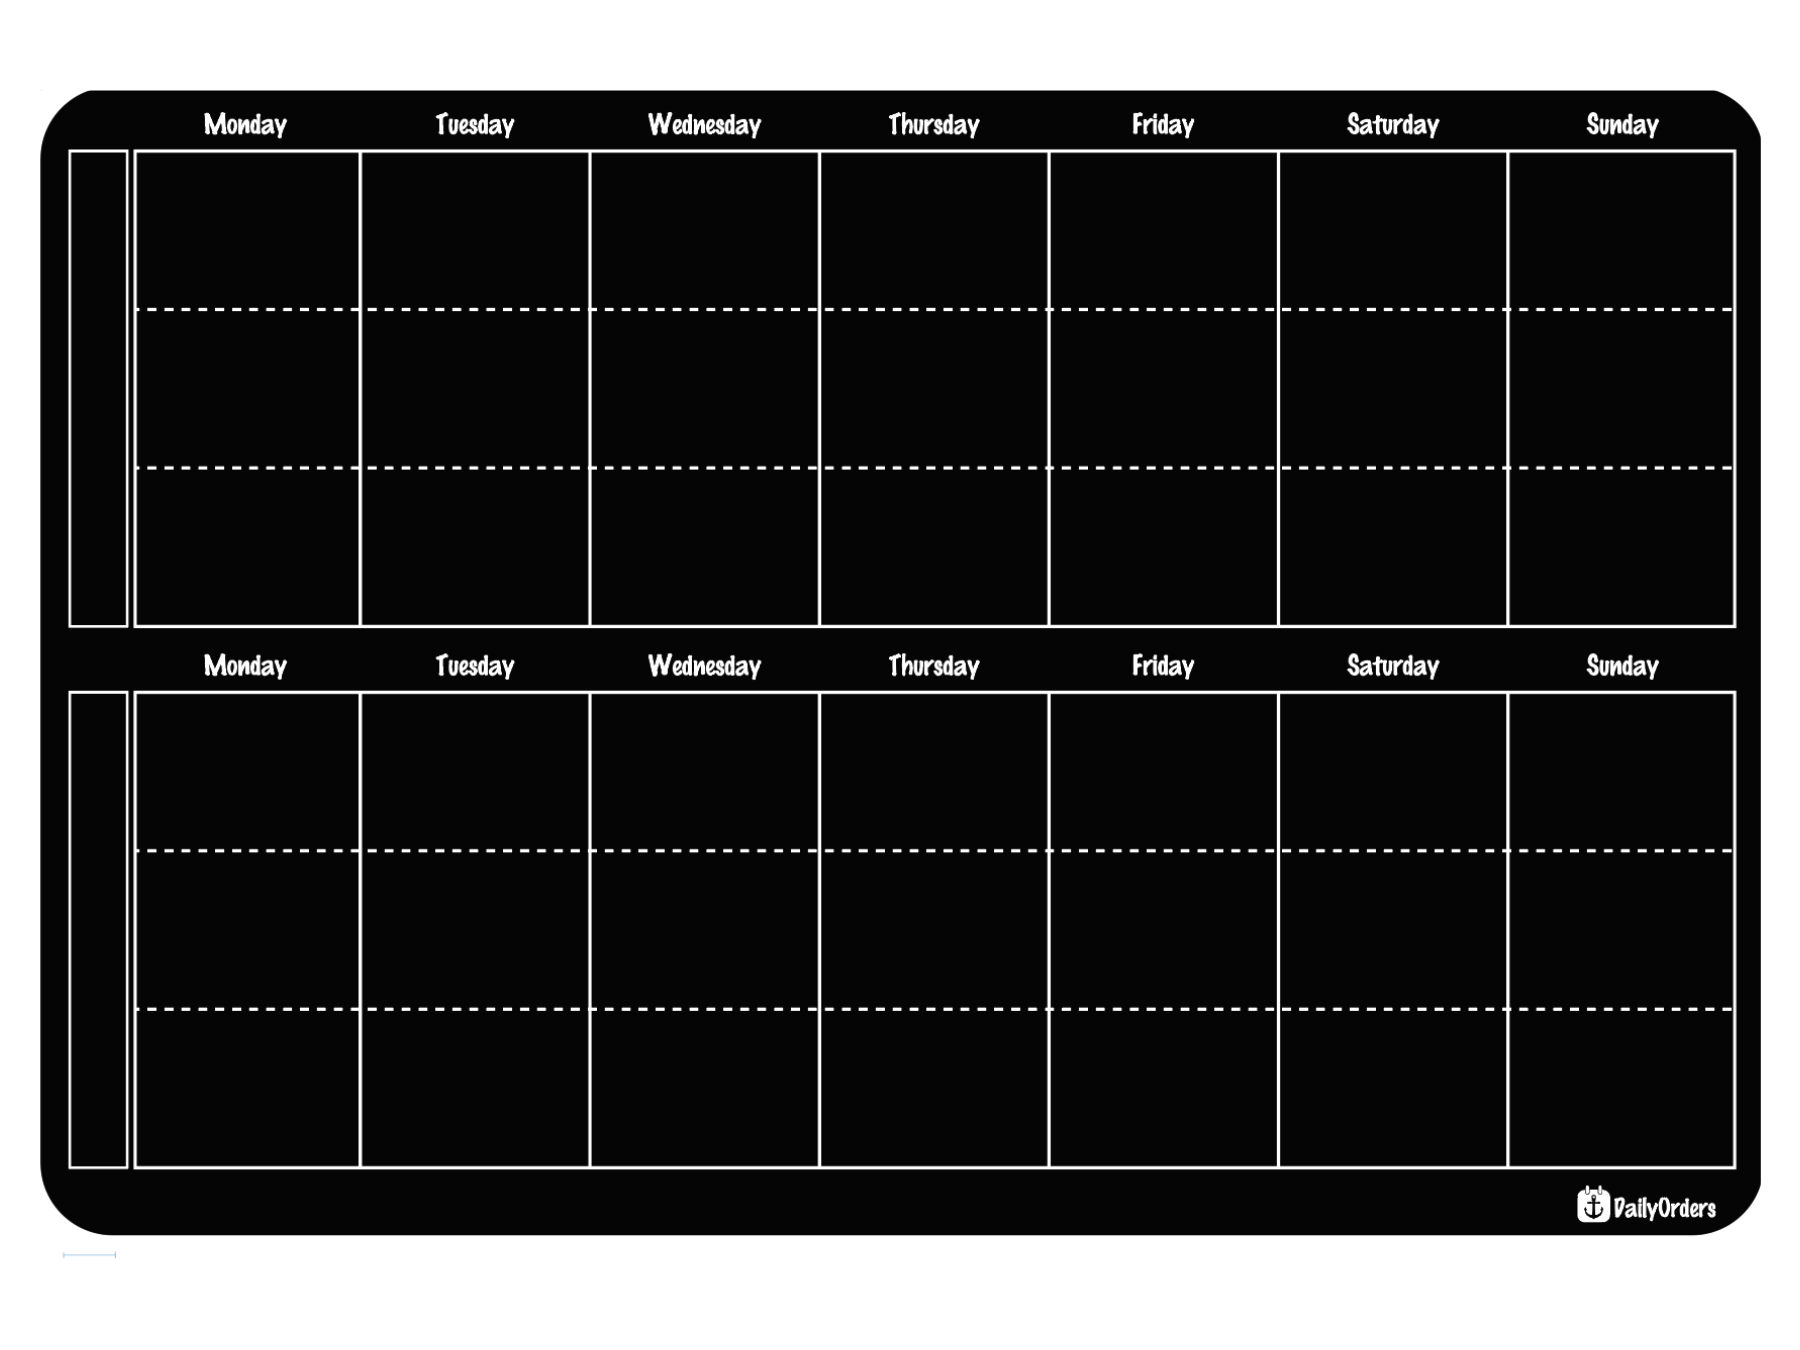 Daily Orders Weekly Planner Black Fortnight Planner - Small